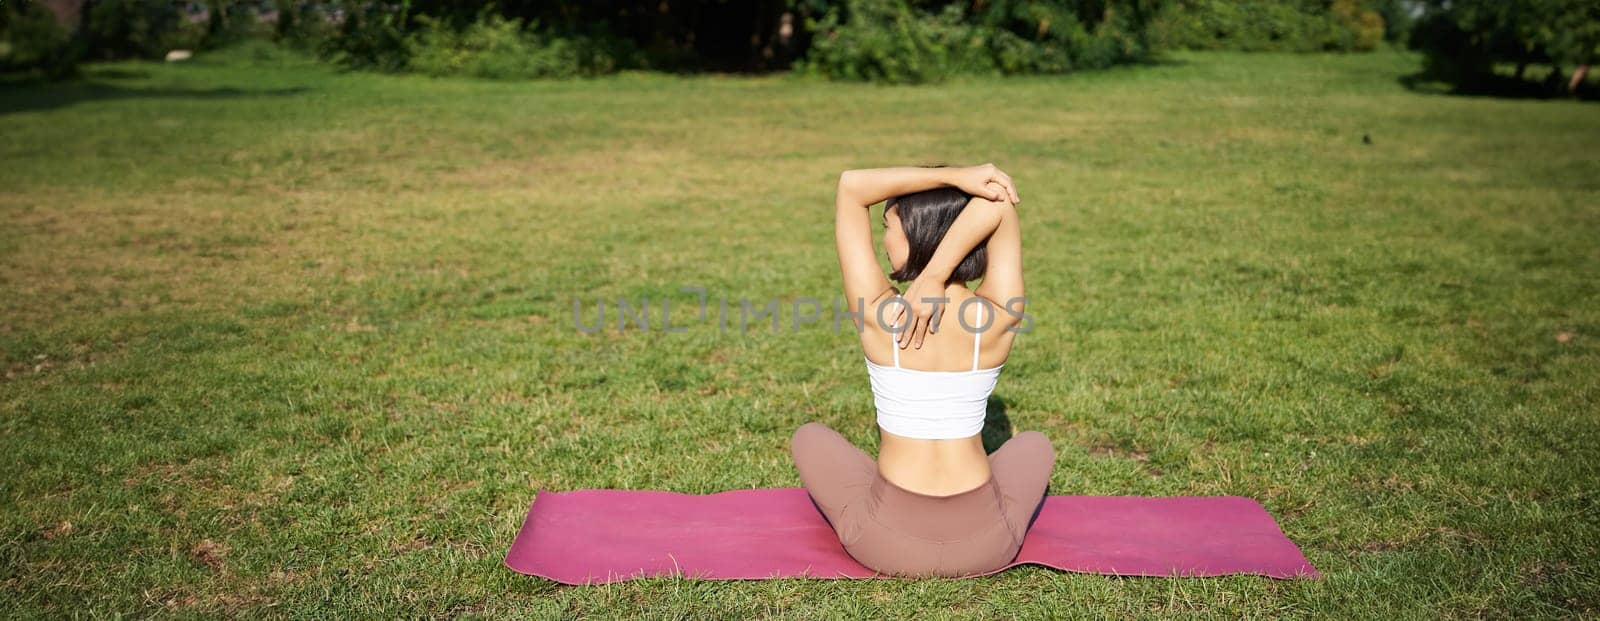 Rear view of sportswoman in middle of workout, stretching her amrs behind back, sitting on rubber yoga mat on lawn in park.